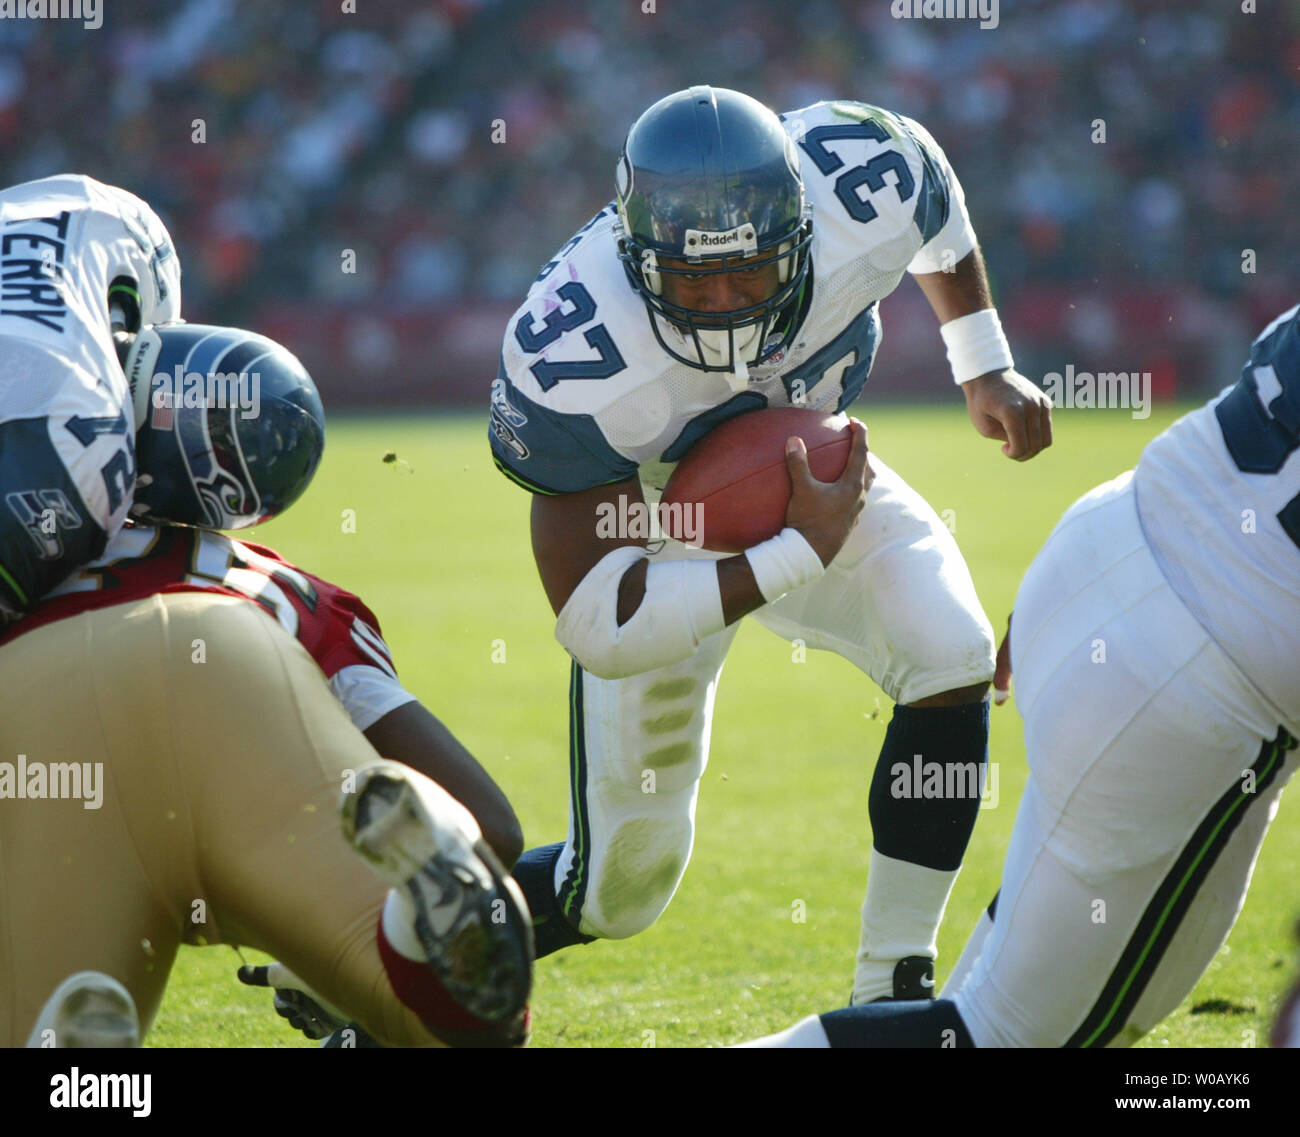 Seattle Seahawks RB Shaun Alexander (37) finds a hole to score a TD against the San Francisco 49ers in San Francisco on November 7, 2004. The Seahawks defeated the 49ers 42-27.   (UPI Photo/Bruce Gordon) Stock Photo